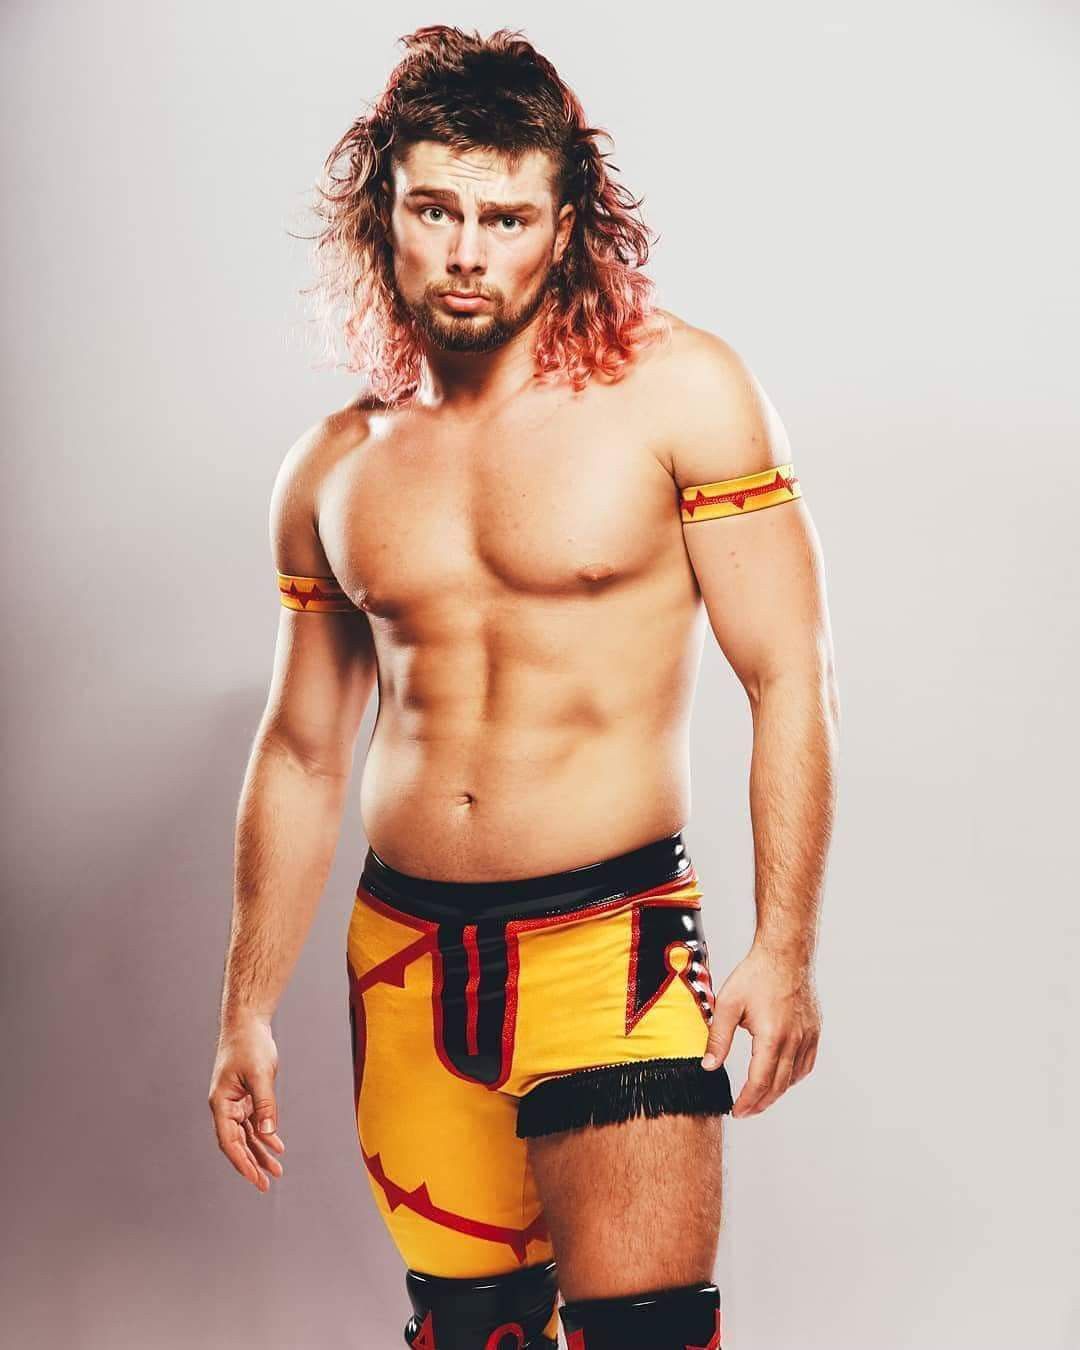 Brian Pillman Jr on His Name, Developing His In-Ring Style